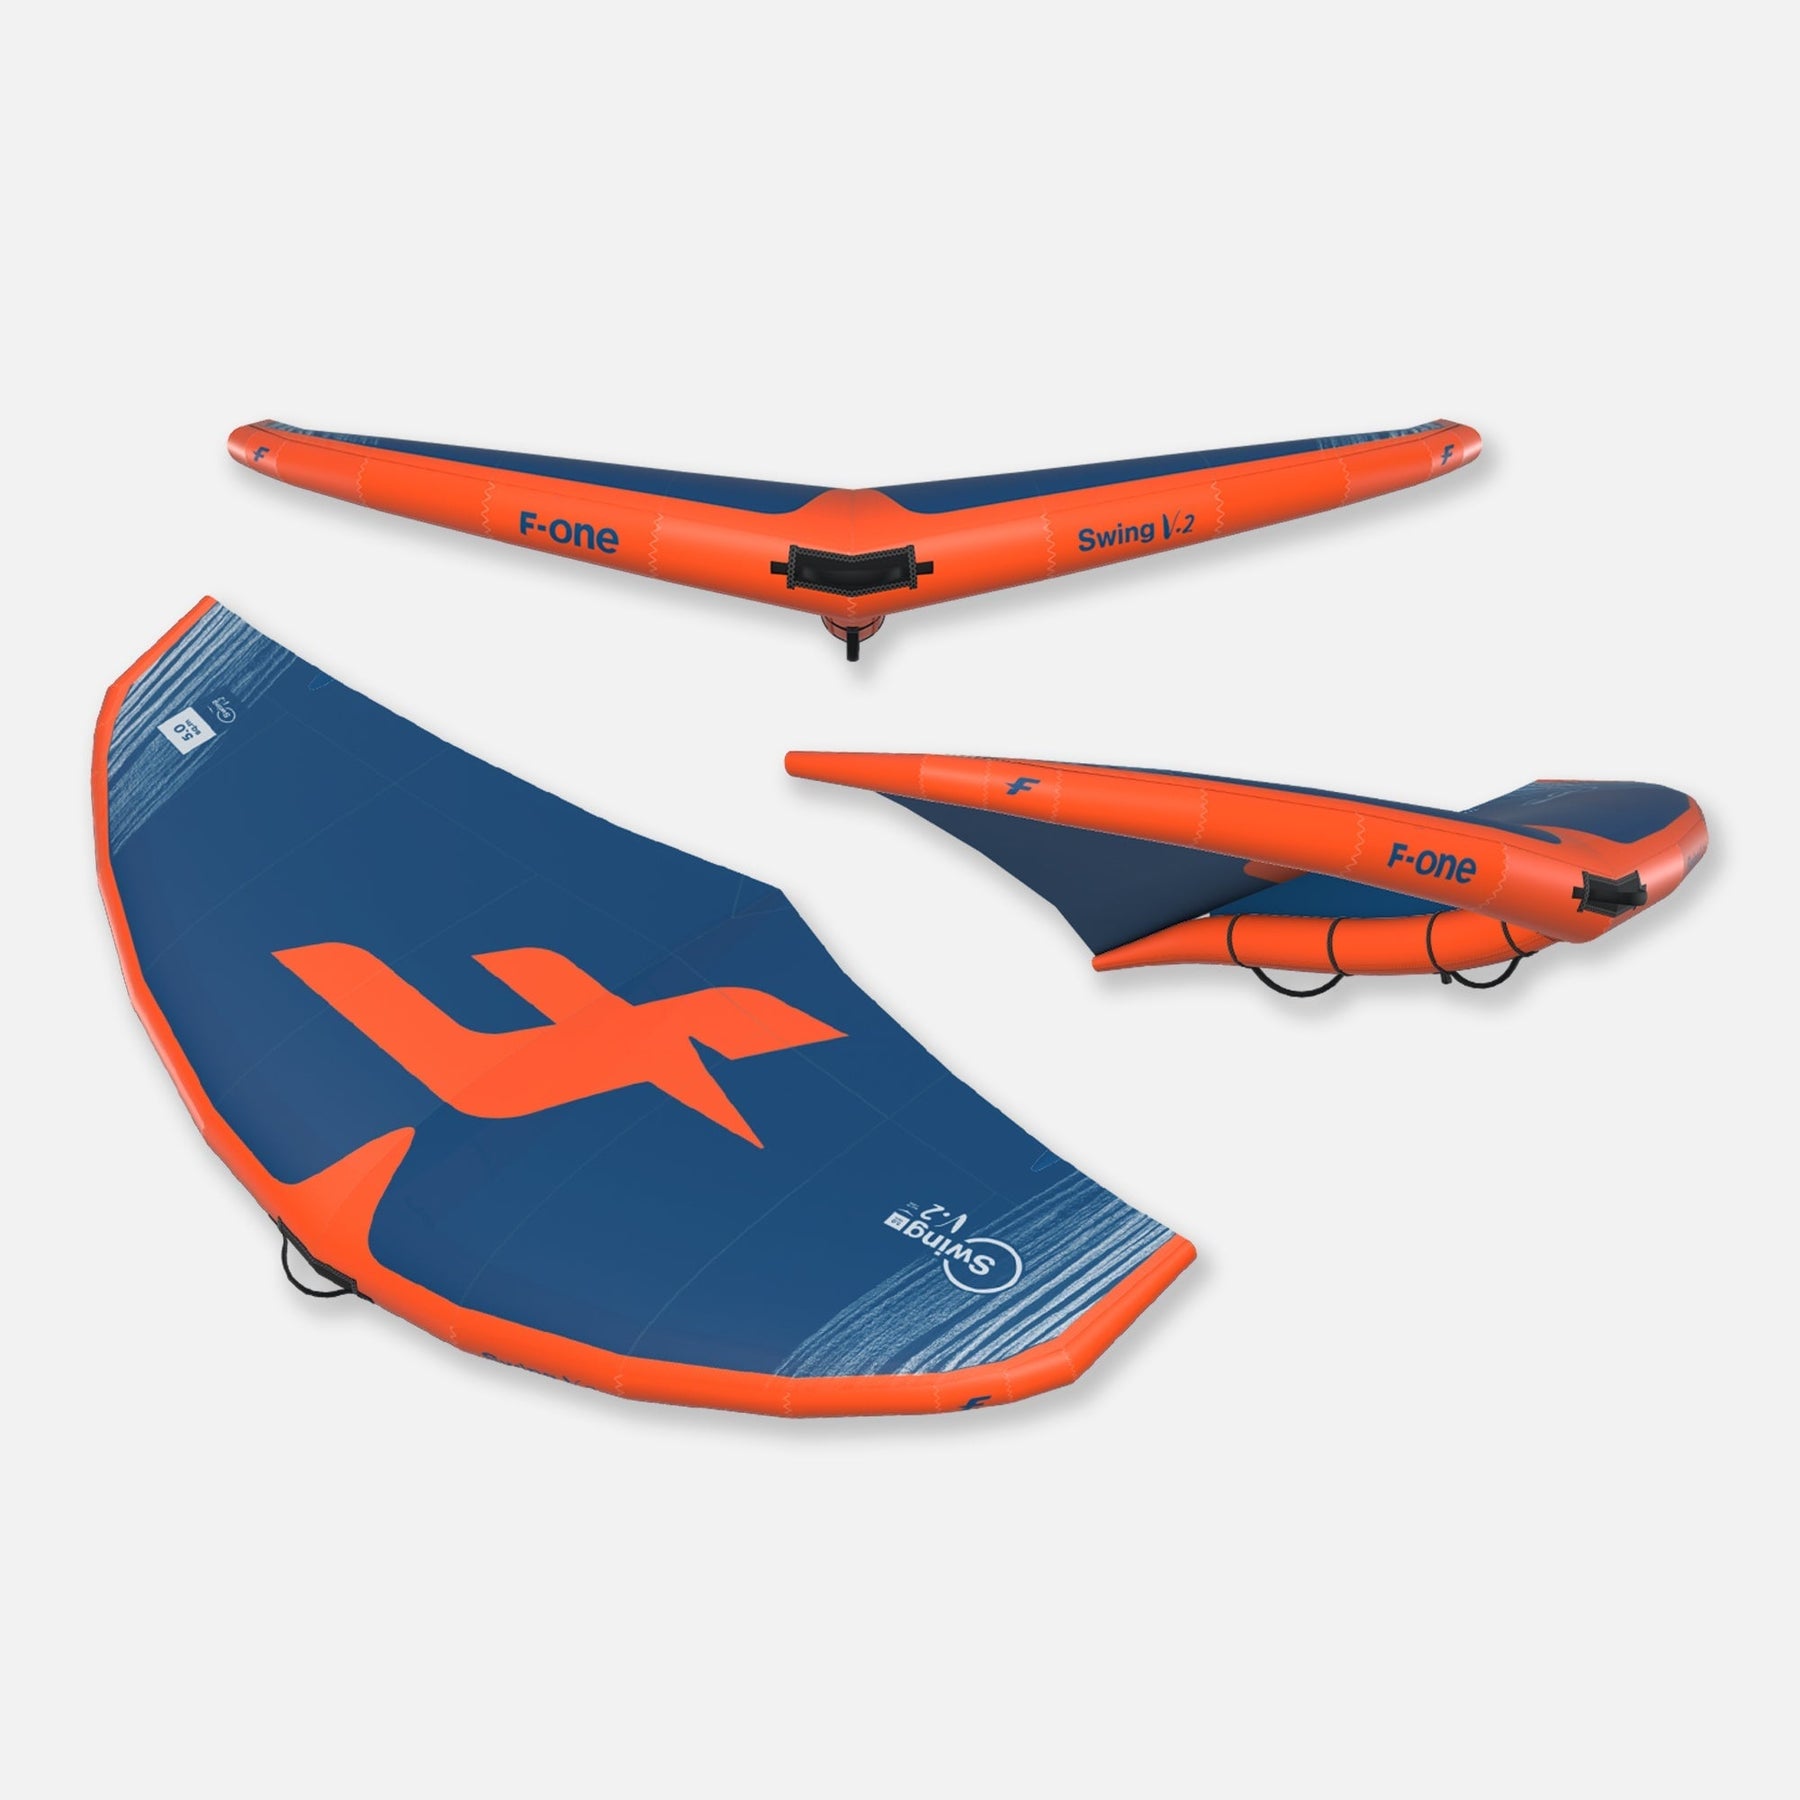 Wingfoilshop wingfoil-shop wingfoiling shop Wing Foiling F-ONE Swing V2 Wing